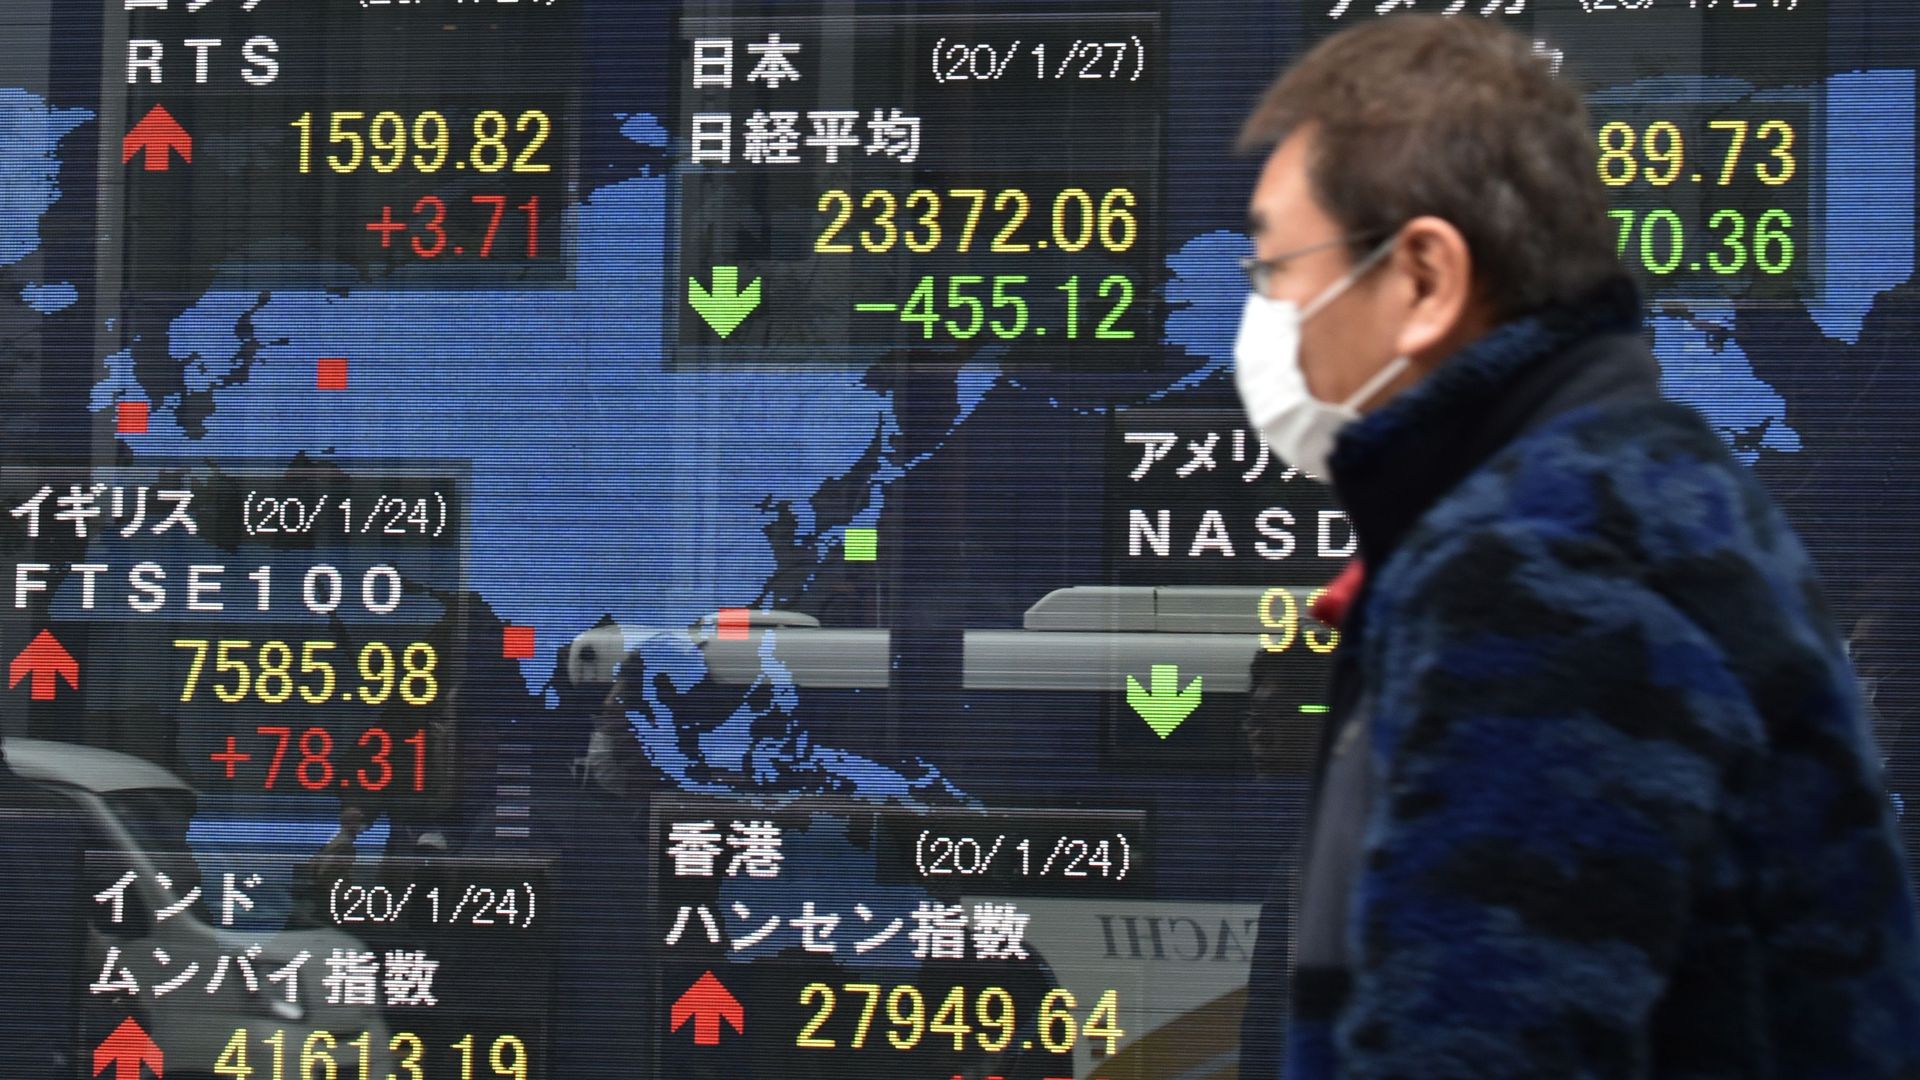 A person wears a surgical mask in the foreground of a screen showing stock prices.